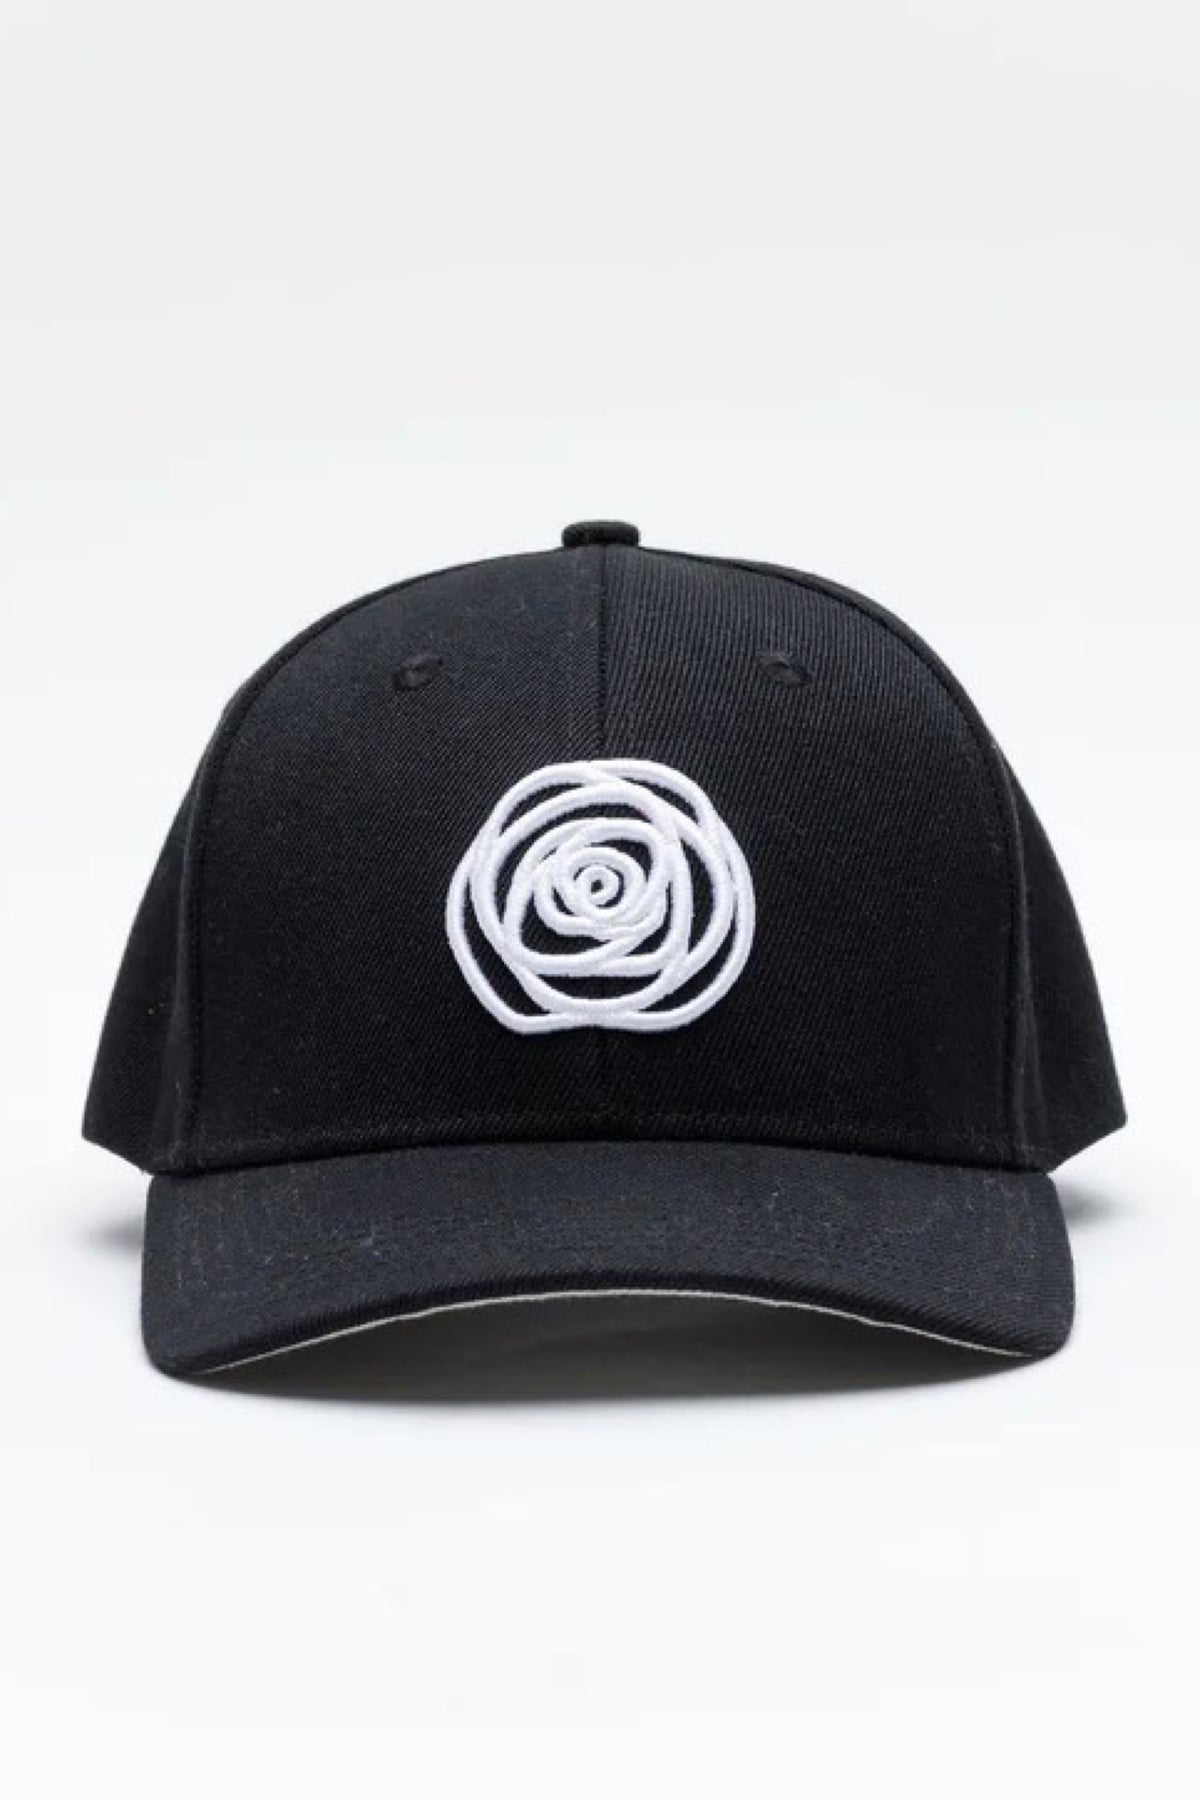 Baseball Cap Black With White Logo On Front And Back